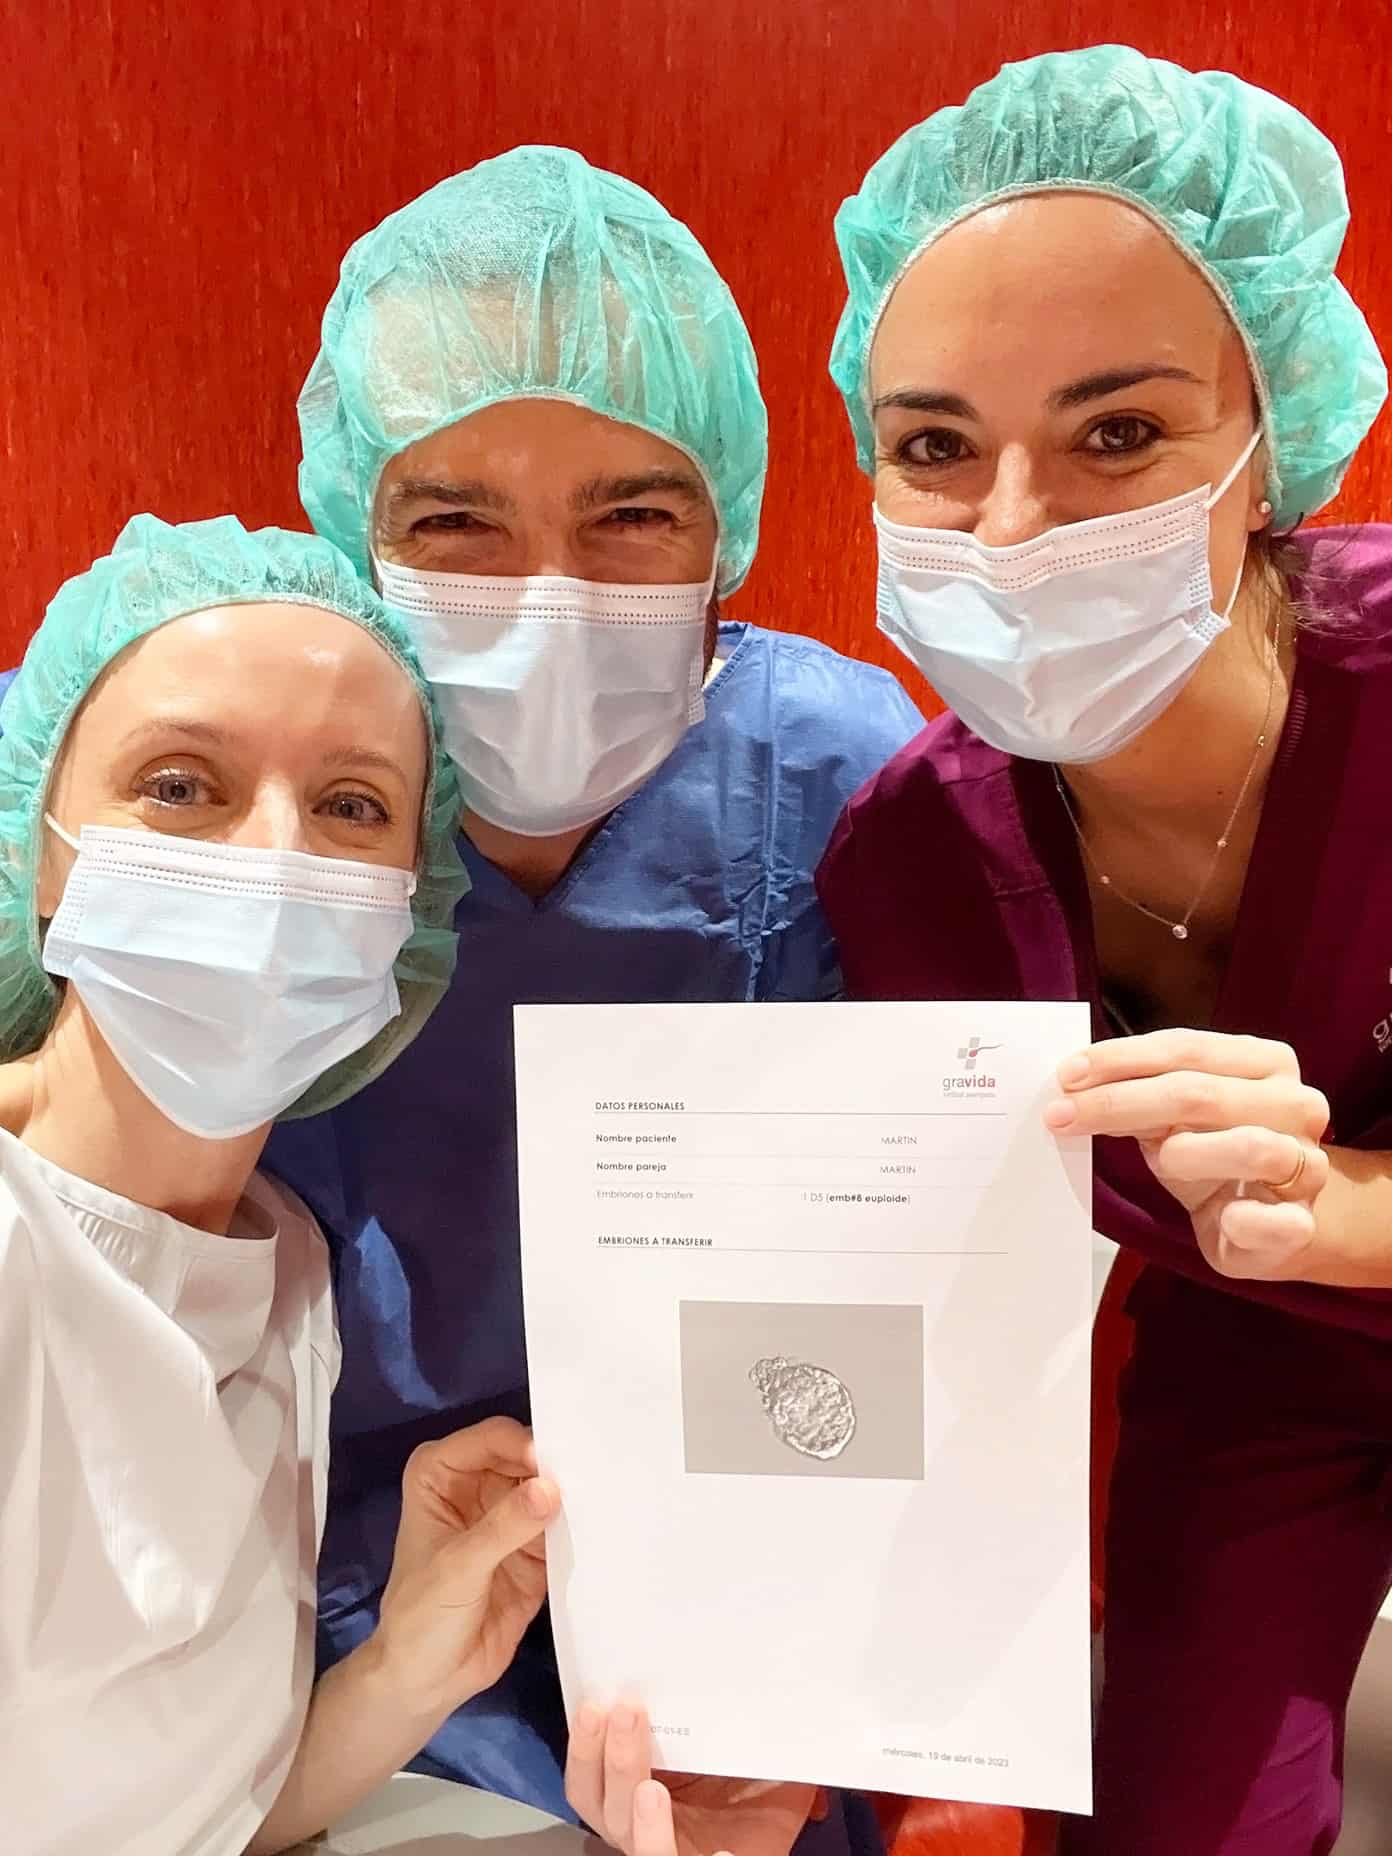 Our embryo transfer in Barcelona